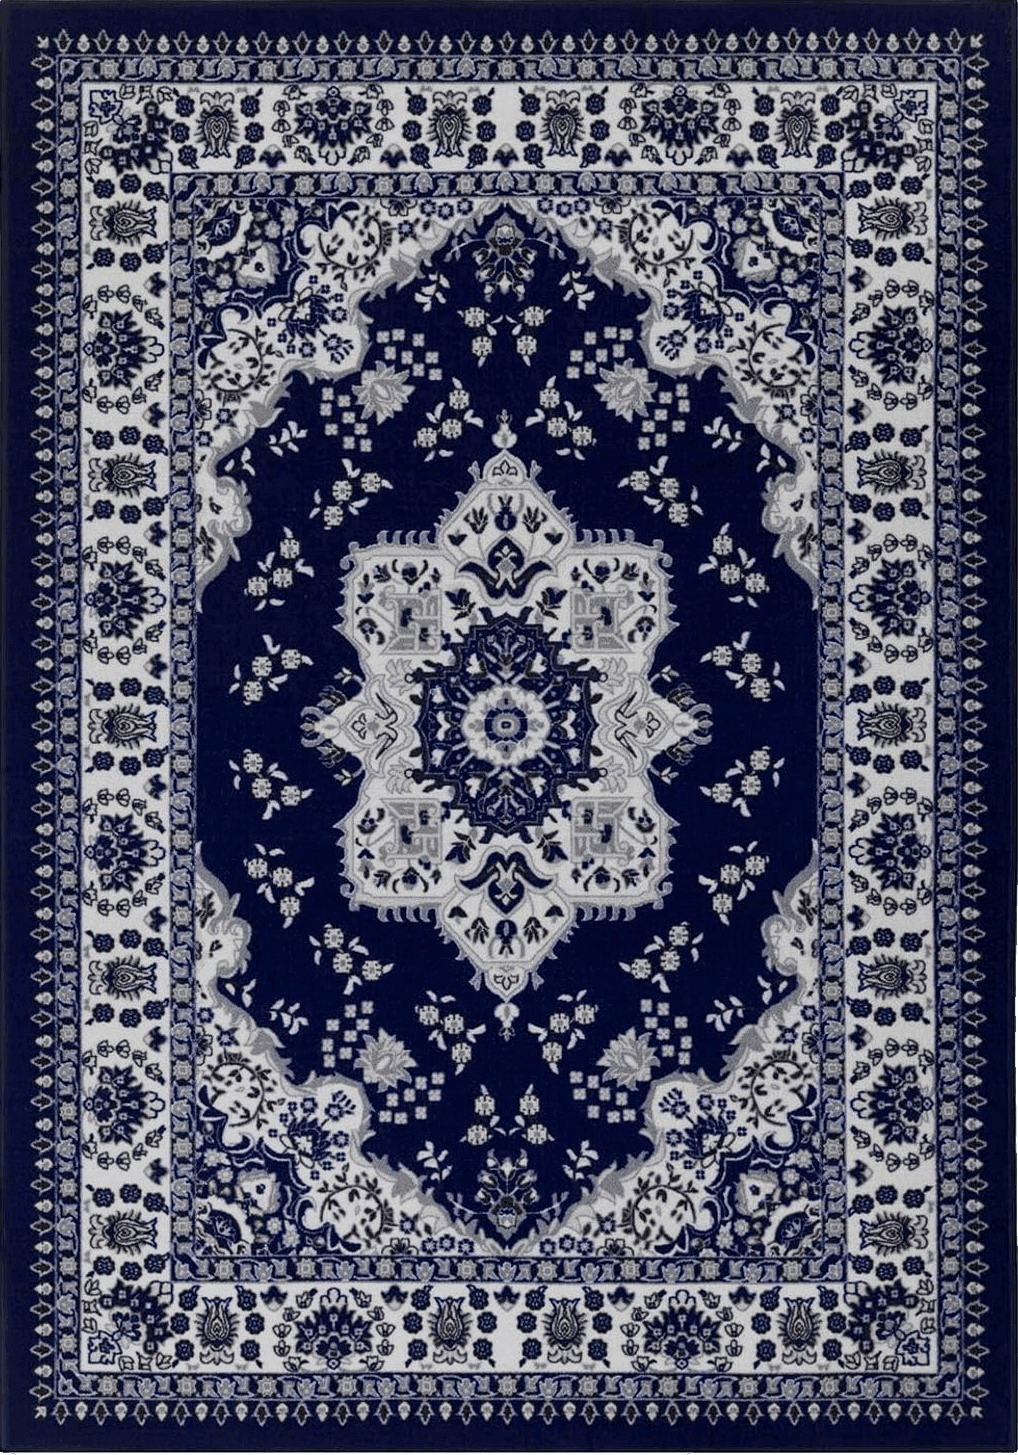 Turkish Antep Rugs Alfombras Oriental Traditional 5x7 Non-Skid (Non-Slip) Low Profile Pile Rubber Backing Indoor Area Rugs (Navy Blue, 5' x 7')